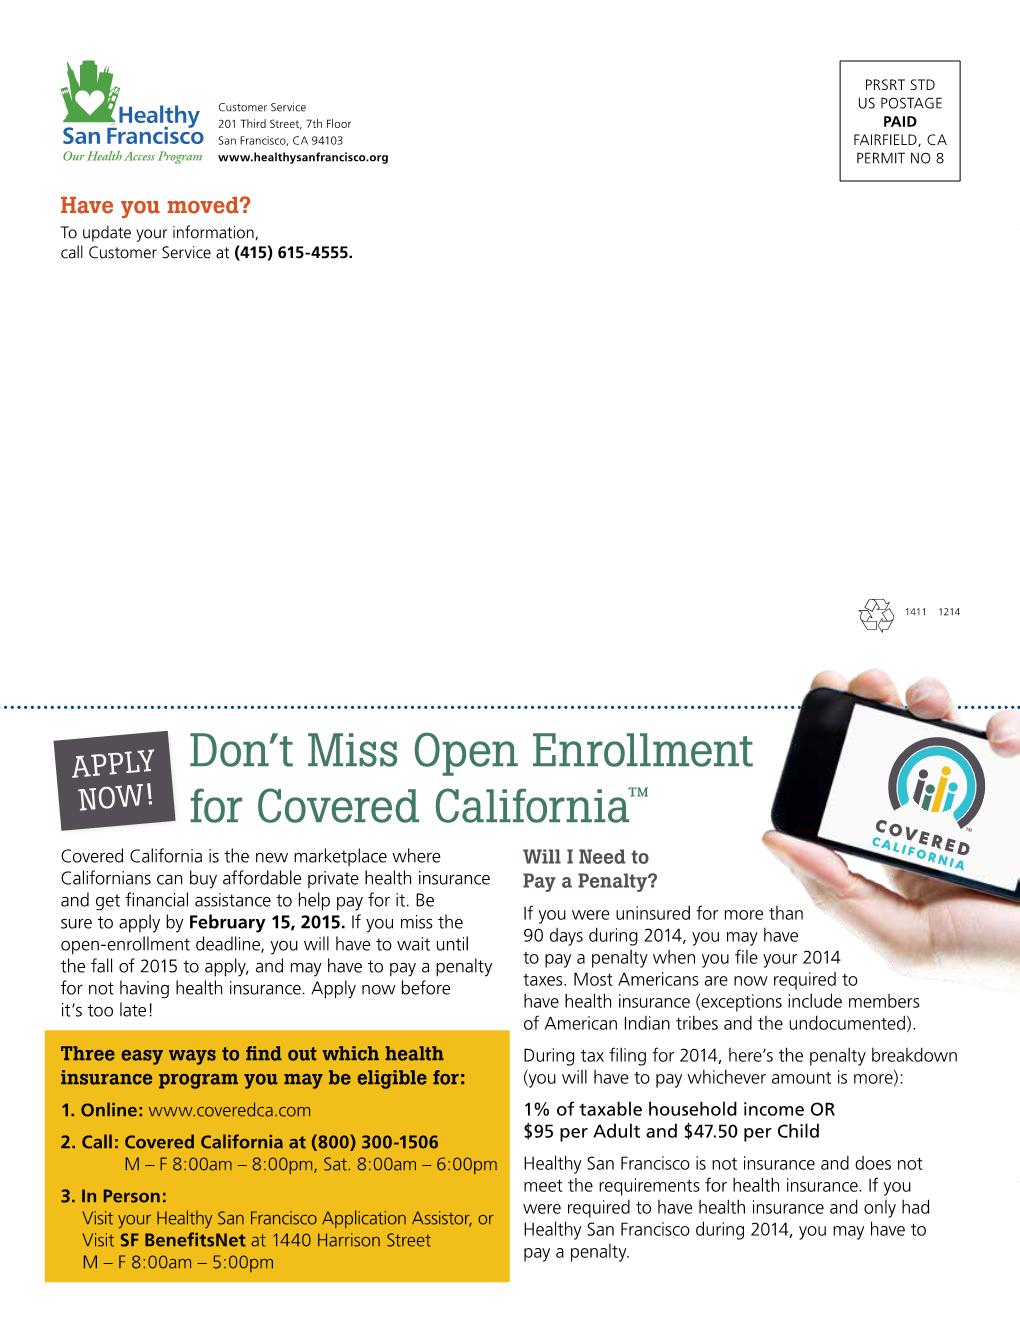 Don't Miss Open Enrollment for Covered California™